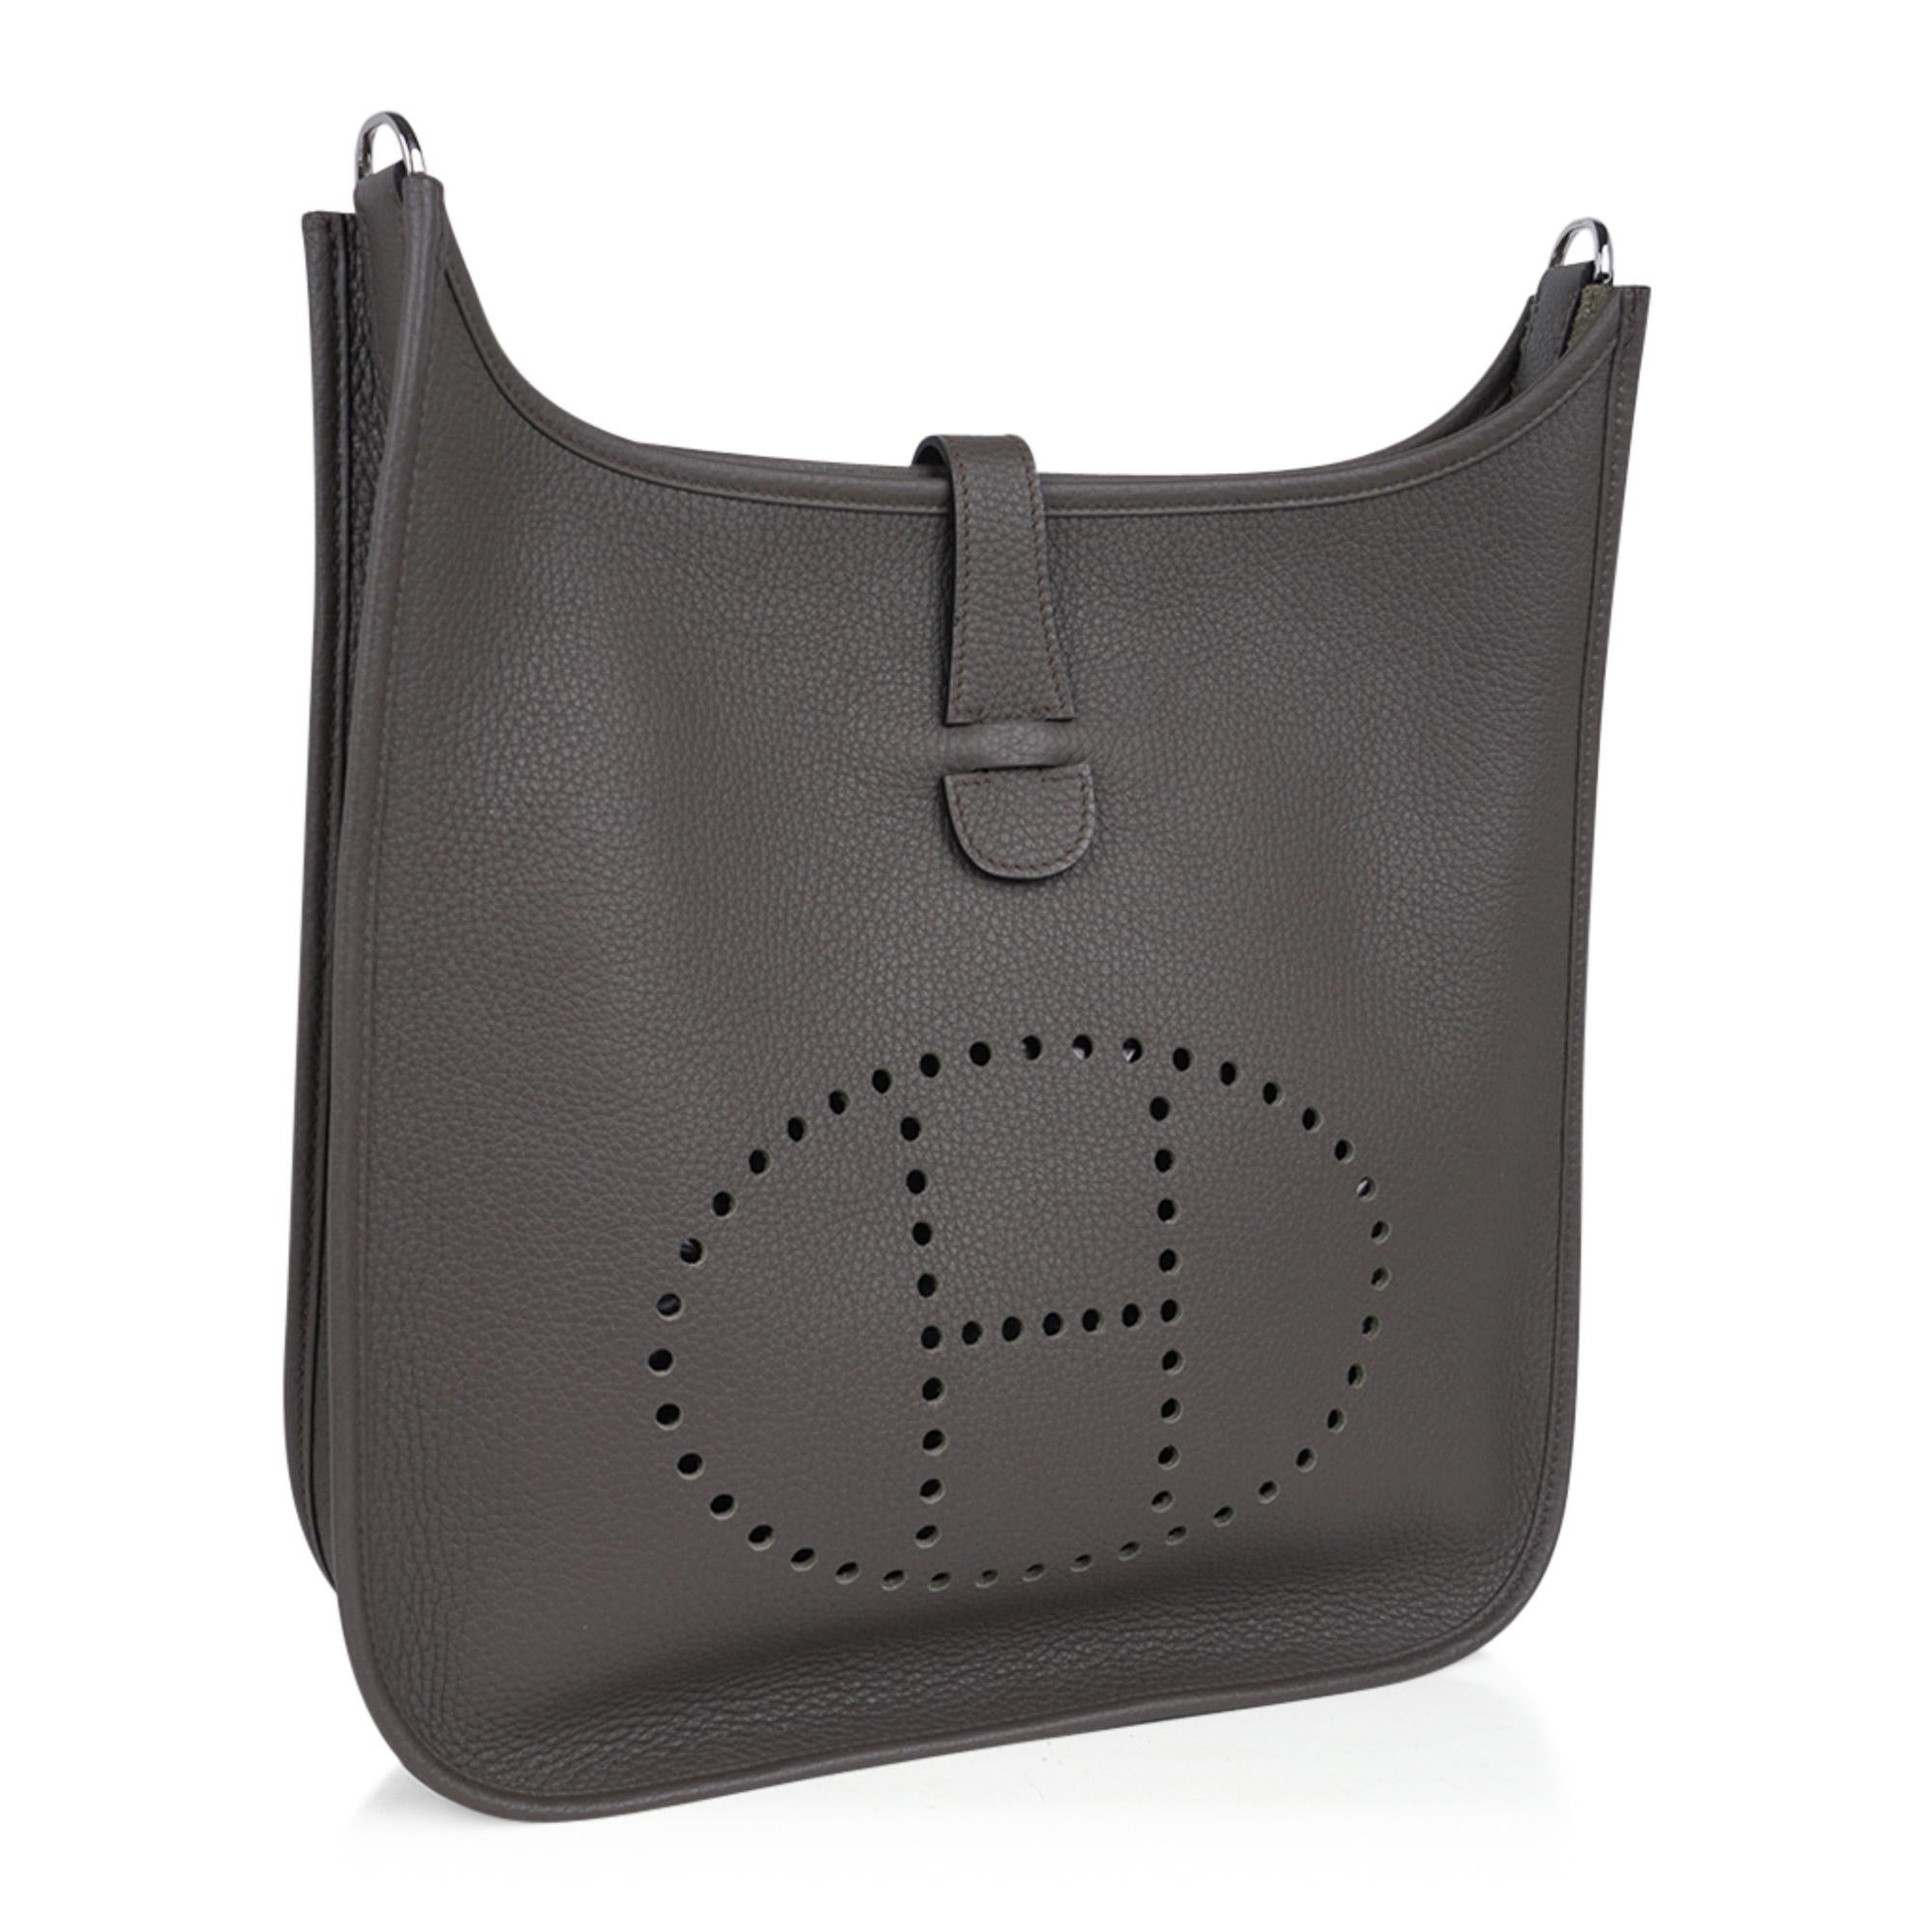 Mightychic offers an Hermes Evelyne GM featured in Etain clemence leather.  
Fabulous shoulder or cross body bag with roomy interior and rear outside deep pocket. 
Sport strap in textile with leather and palladium hardware details.
Signature